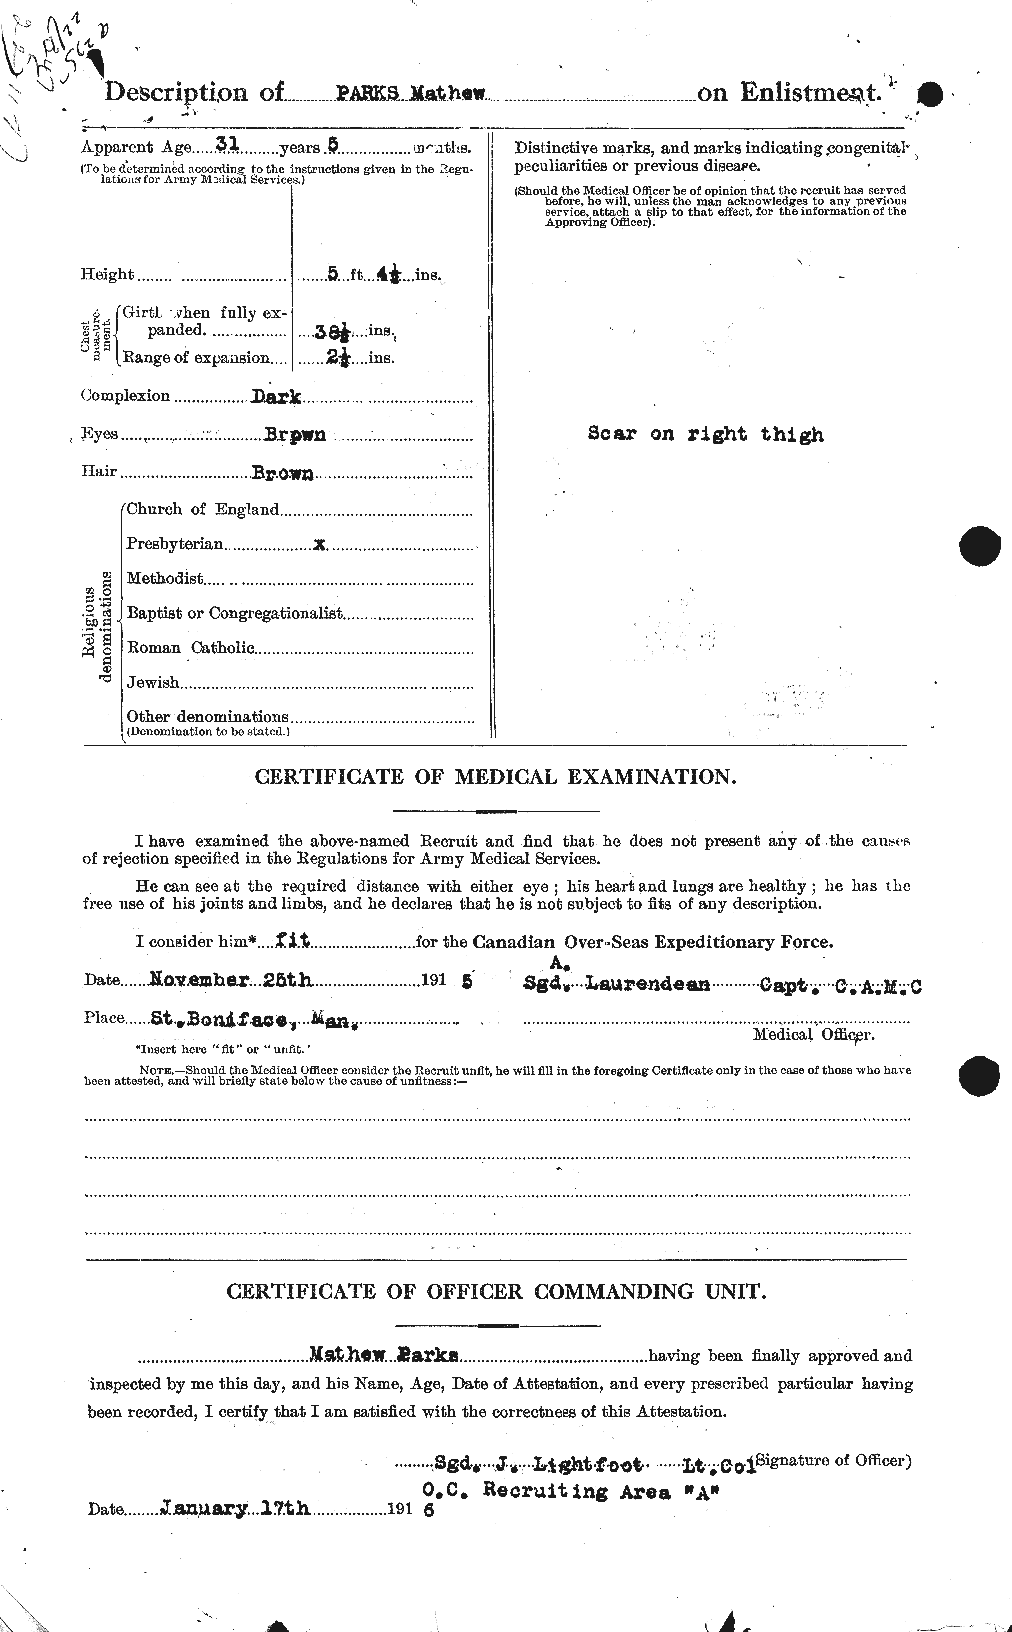 Personnel Records of the First World War - CEF 566186b